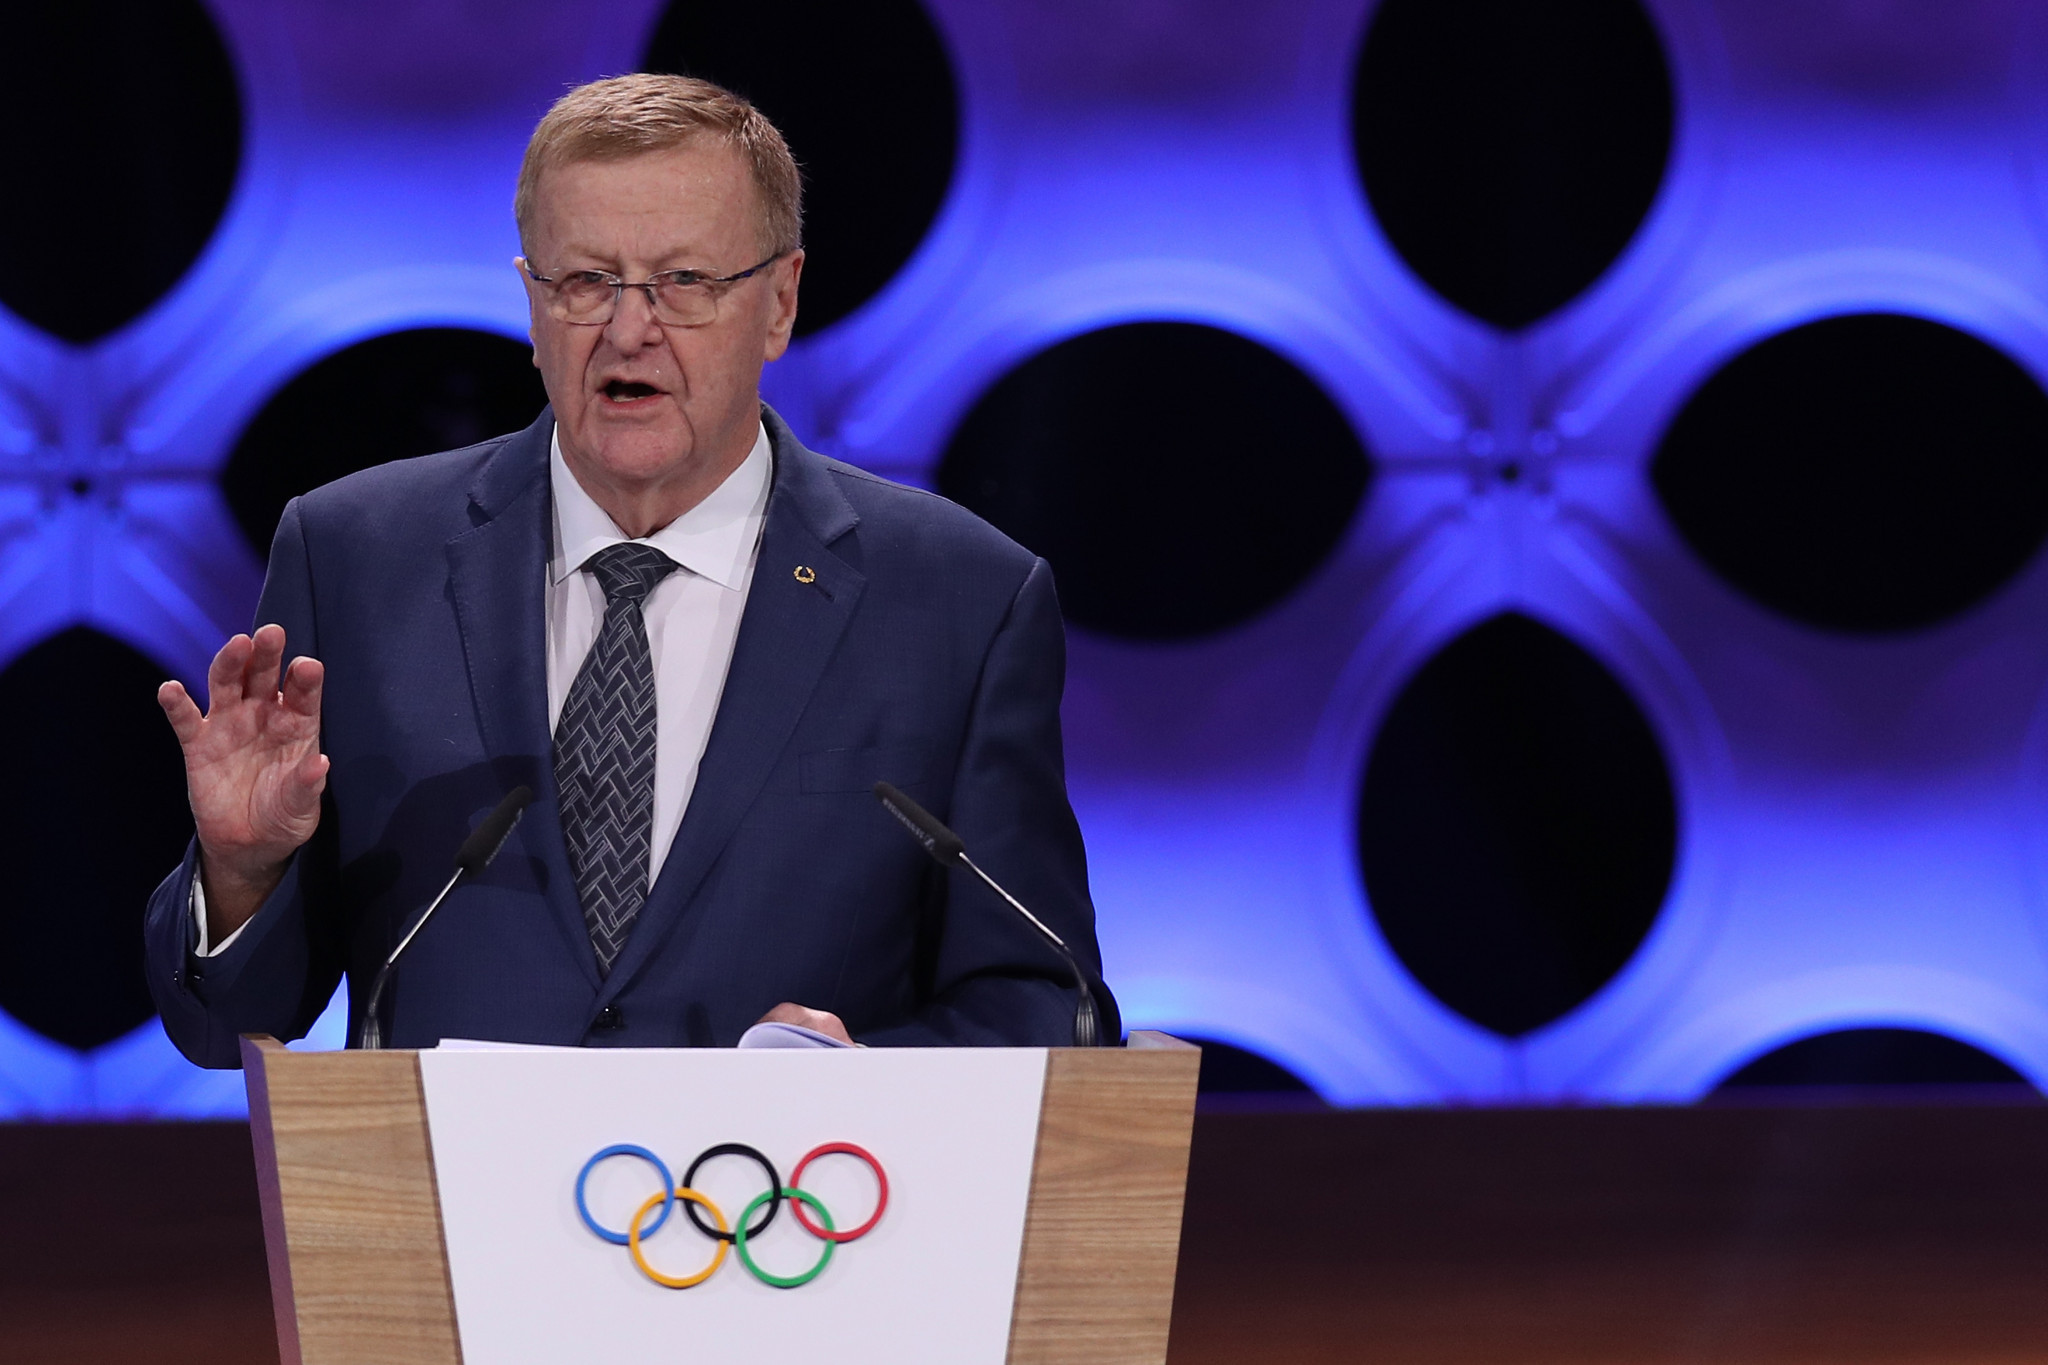 Tokyo 2020 IOC Coordination Commission chair John Coates is expected to announce the framework for next year's Olympics and Paralympics ©Getty Images